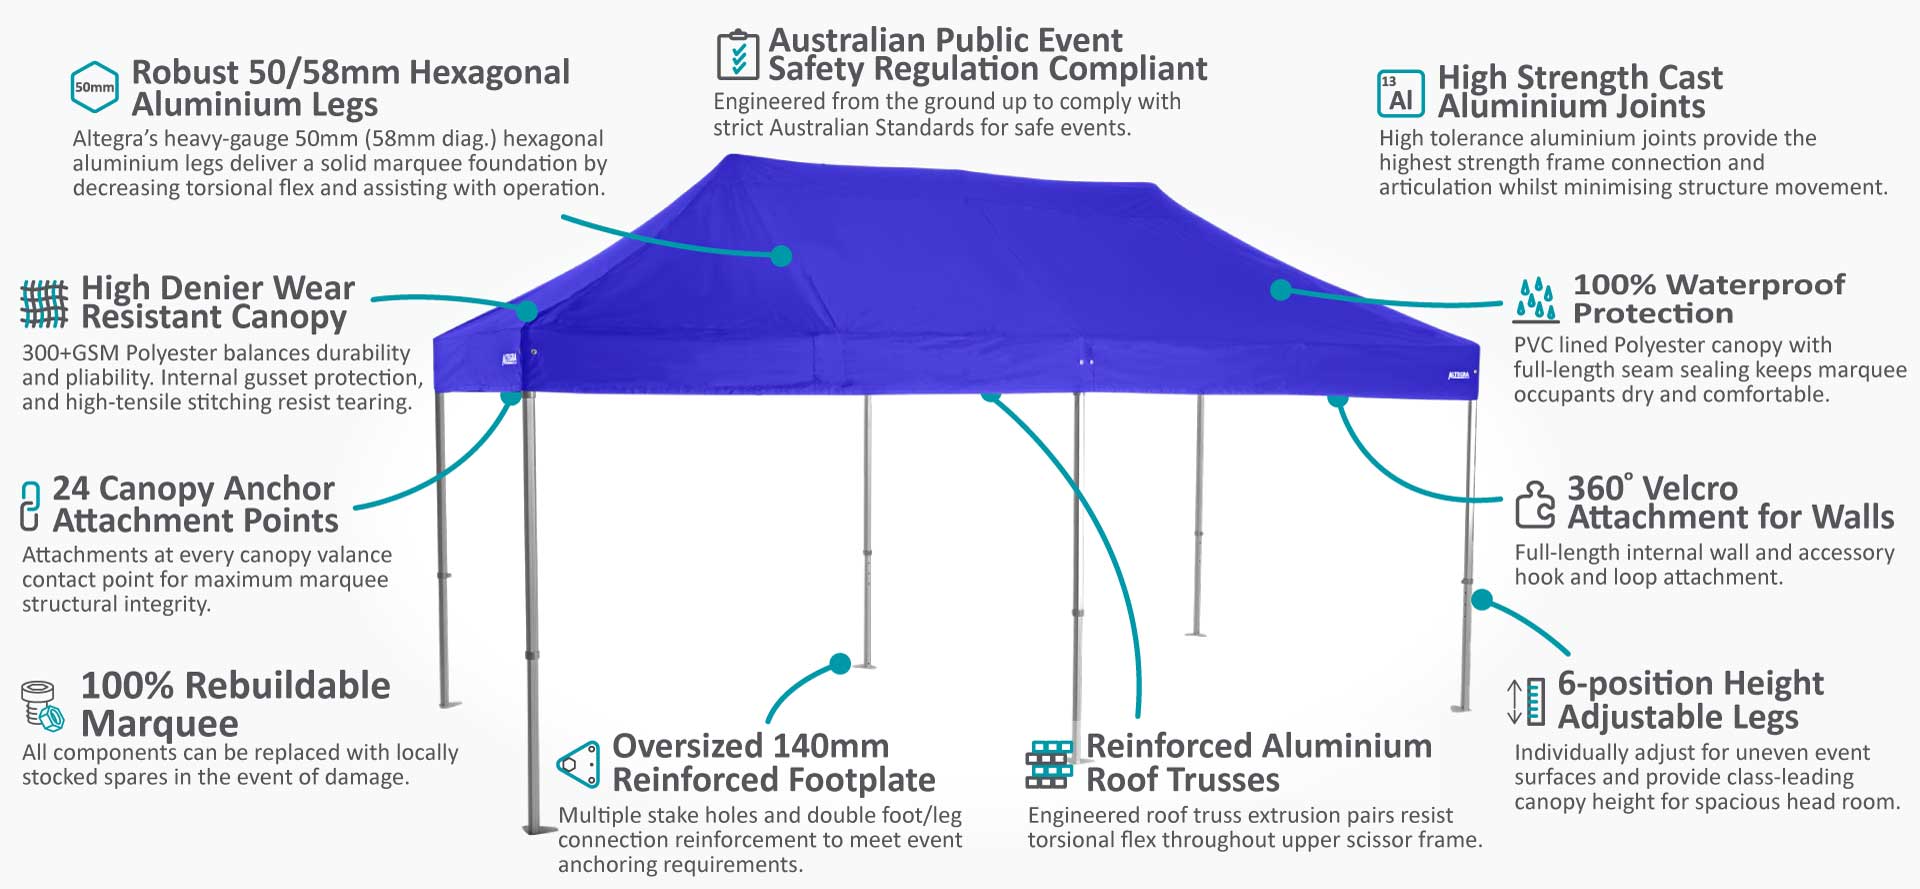 Altegra Heavy Duty 3x6m marquee in royal blue with an overview of key event marquee features - Australia's foremost folding 3m x 6m marquee for events.